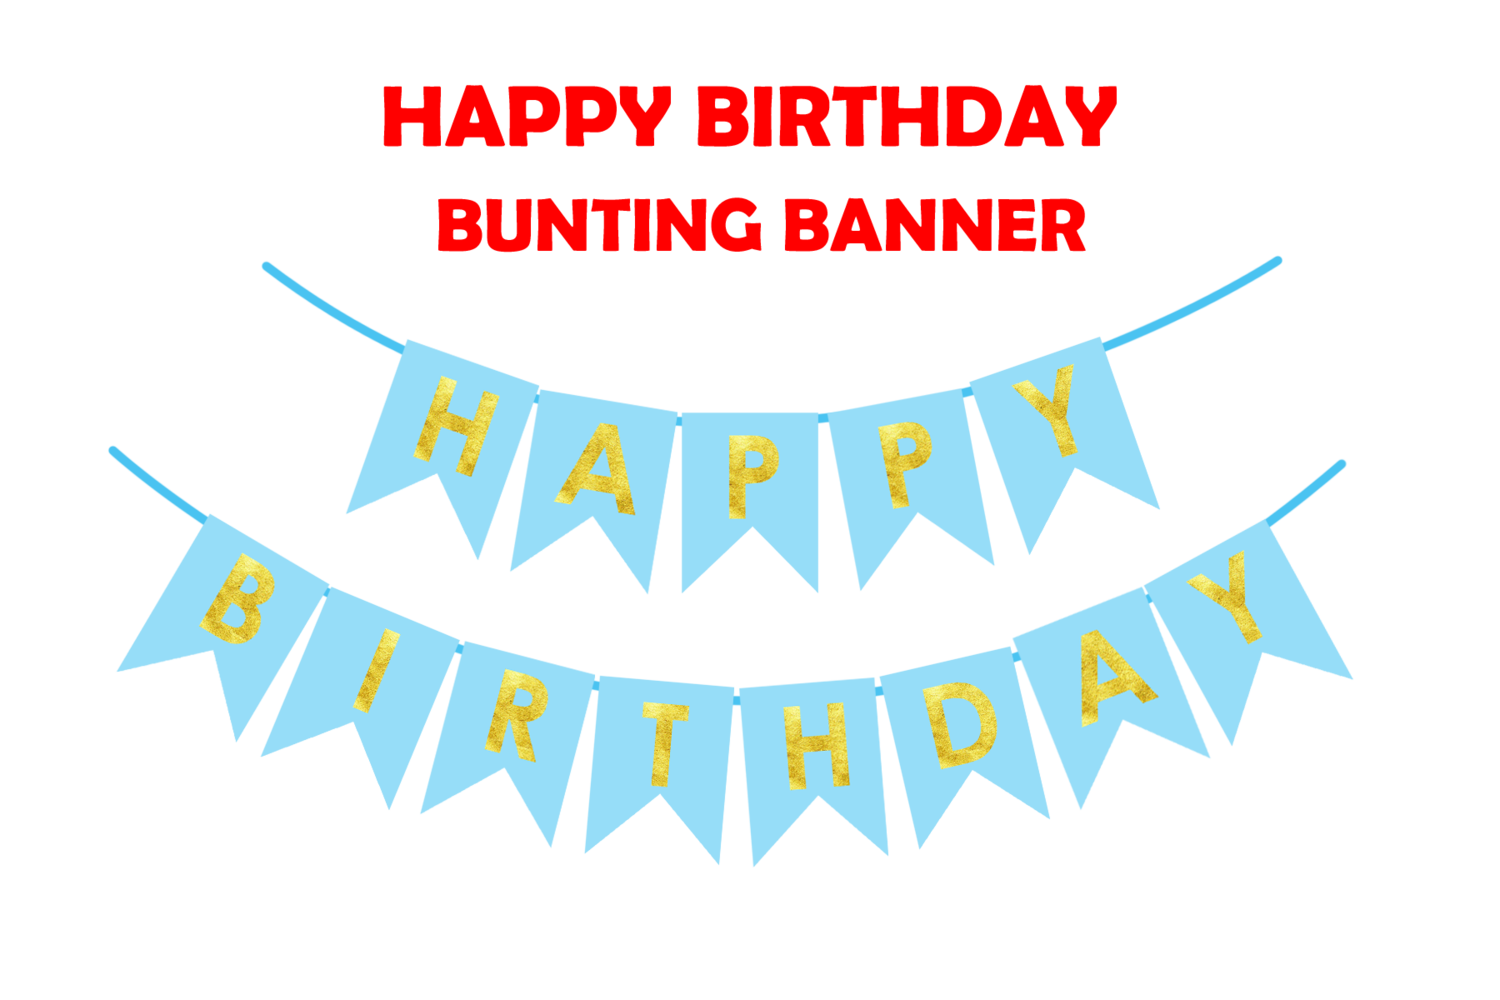 Bunting Banner with Name - Blue